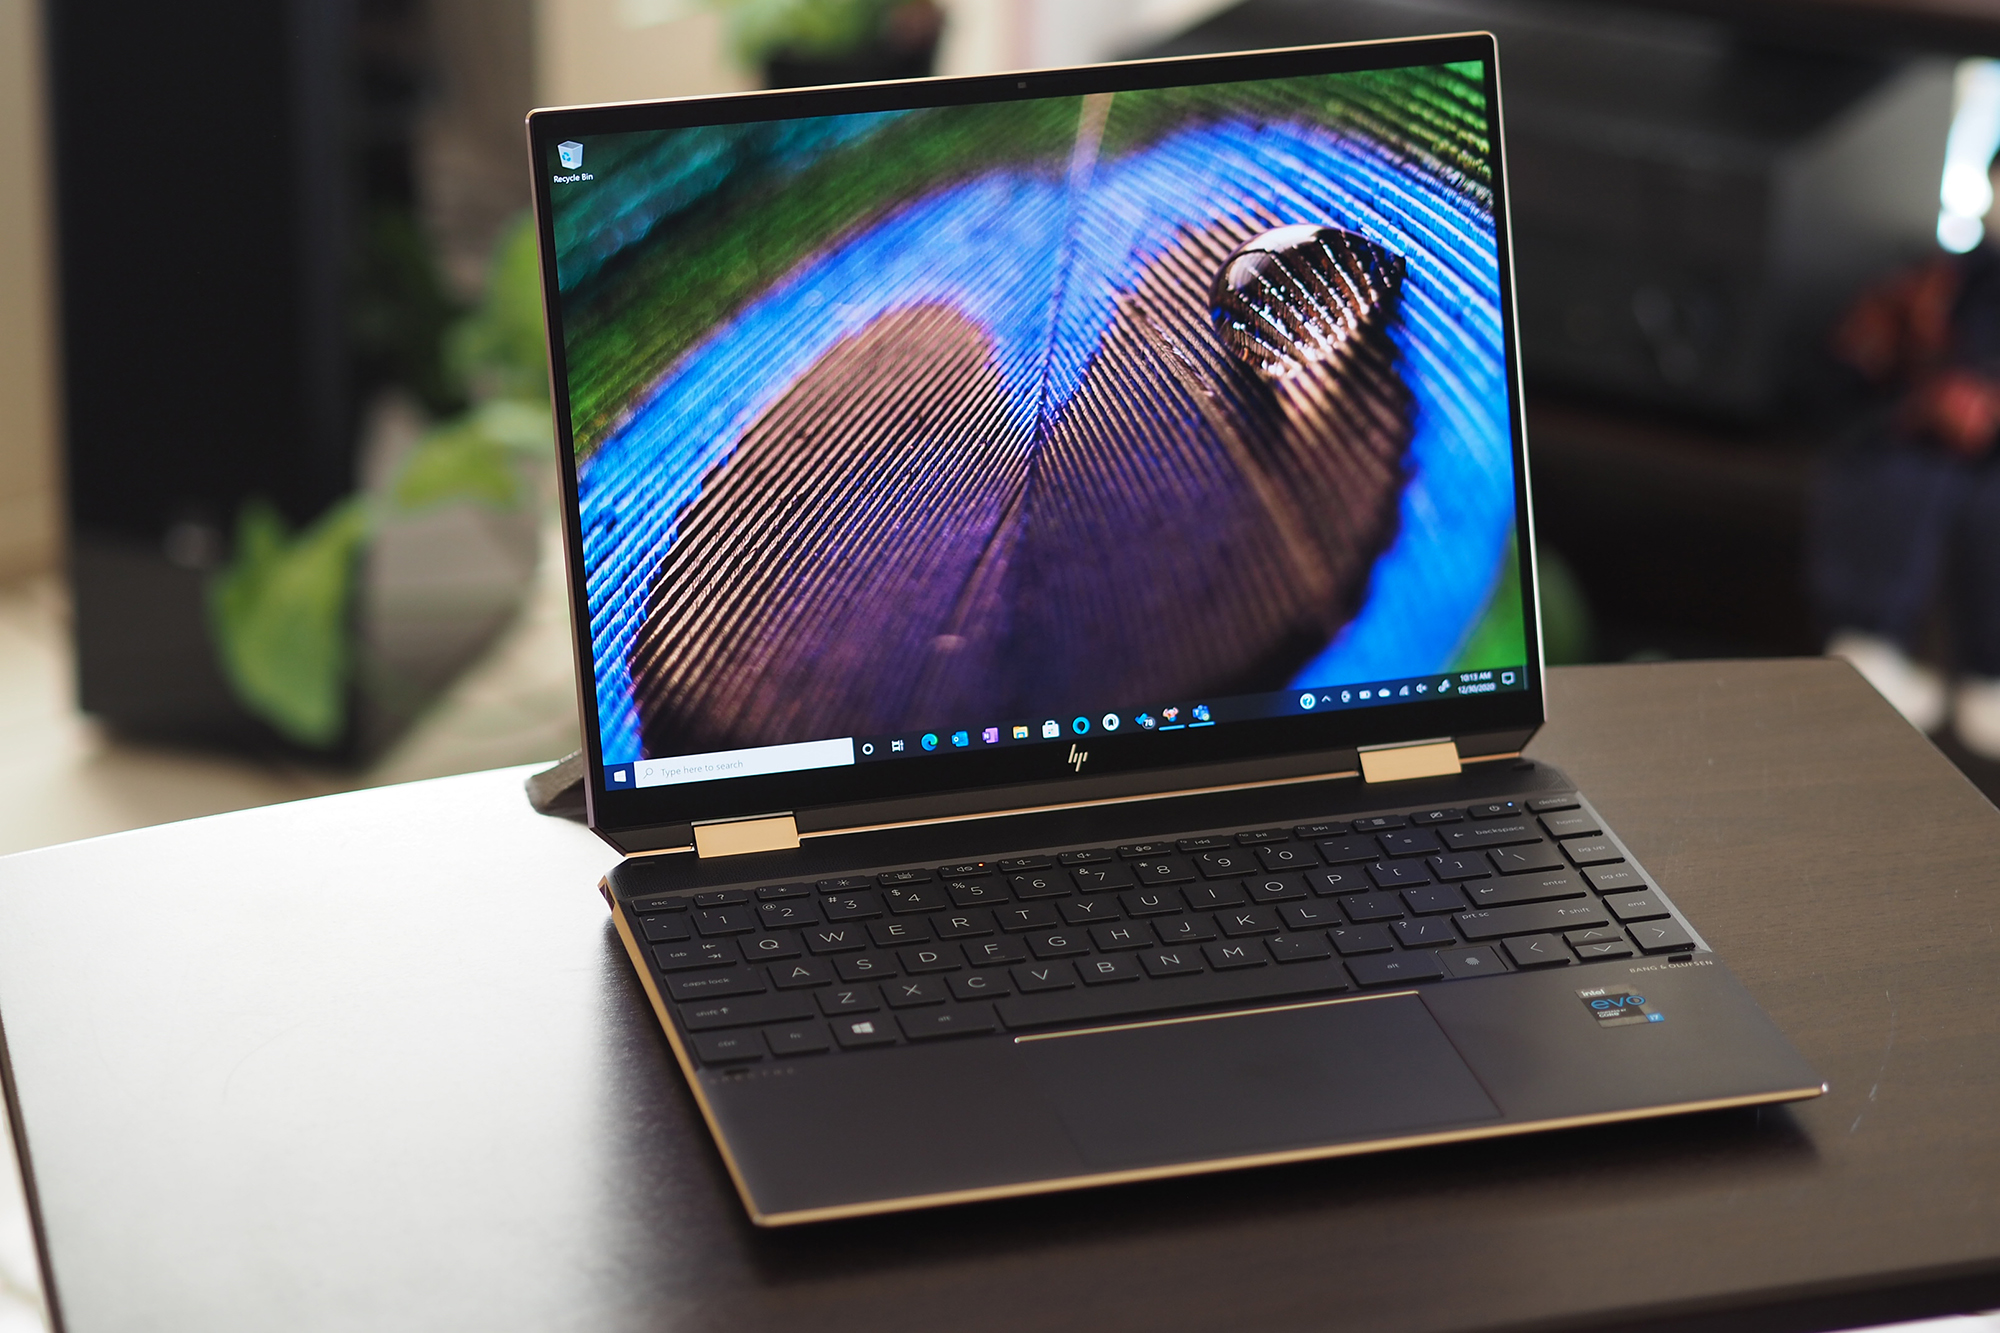 Spectre x360 14 Review: The 2-in-1 Perfected | Digital Trends